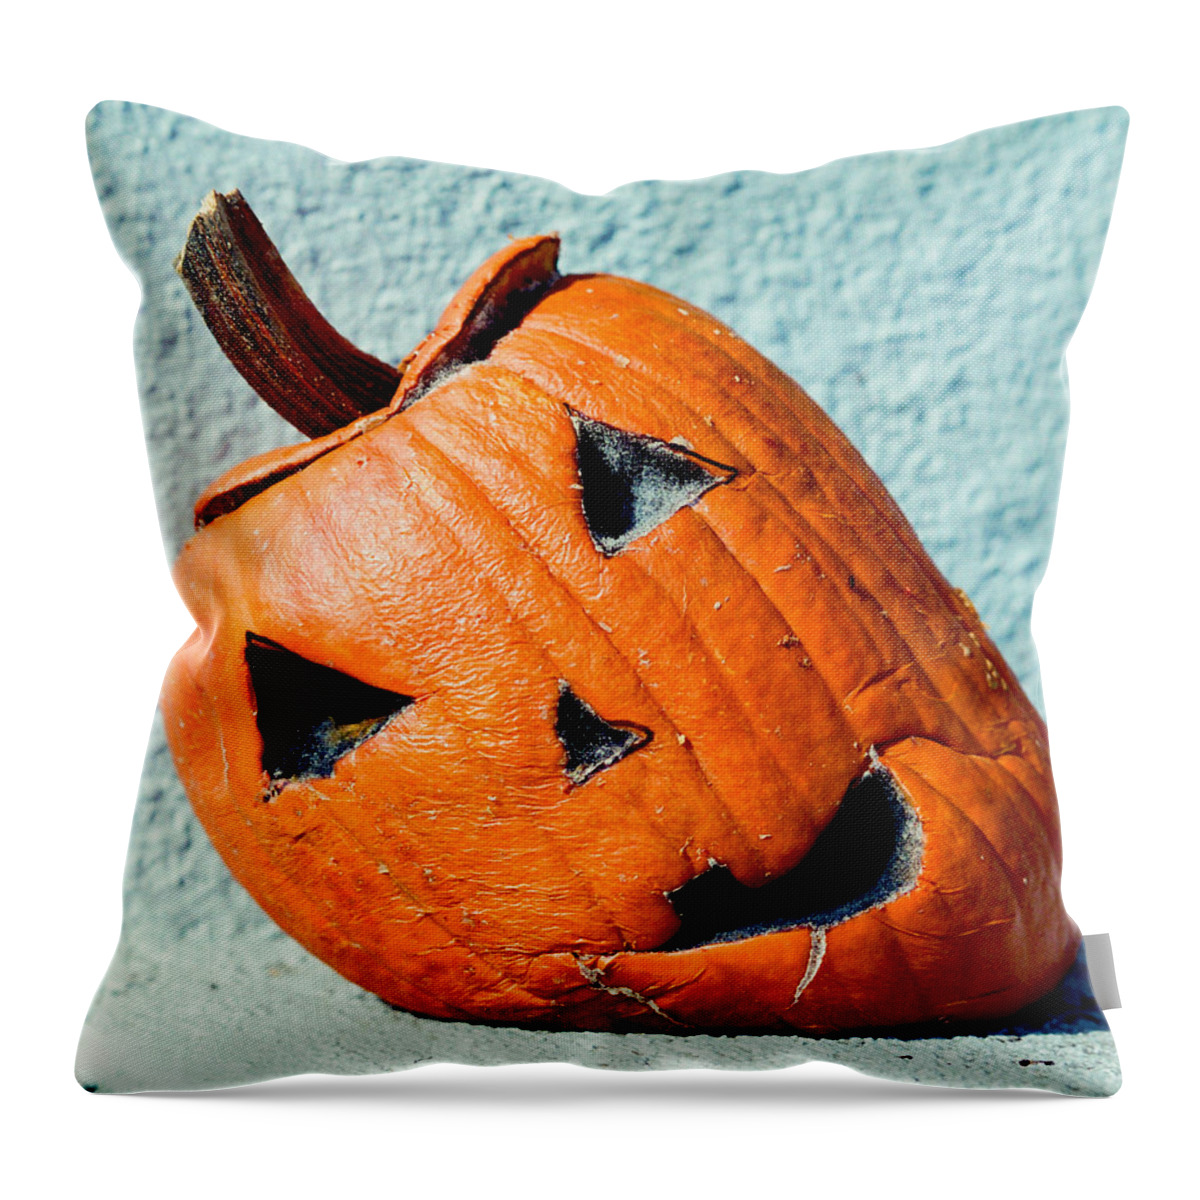 Pumpkin Throw Pillow featuring the photograph I'm Melting by Her Arts Desire